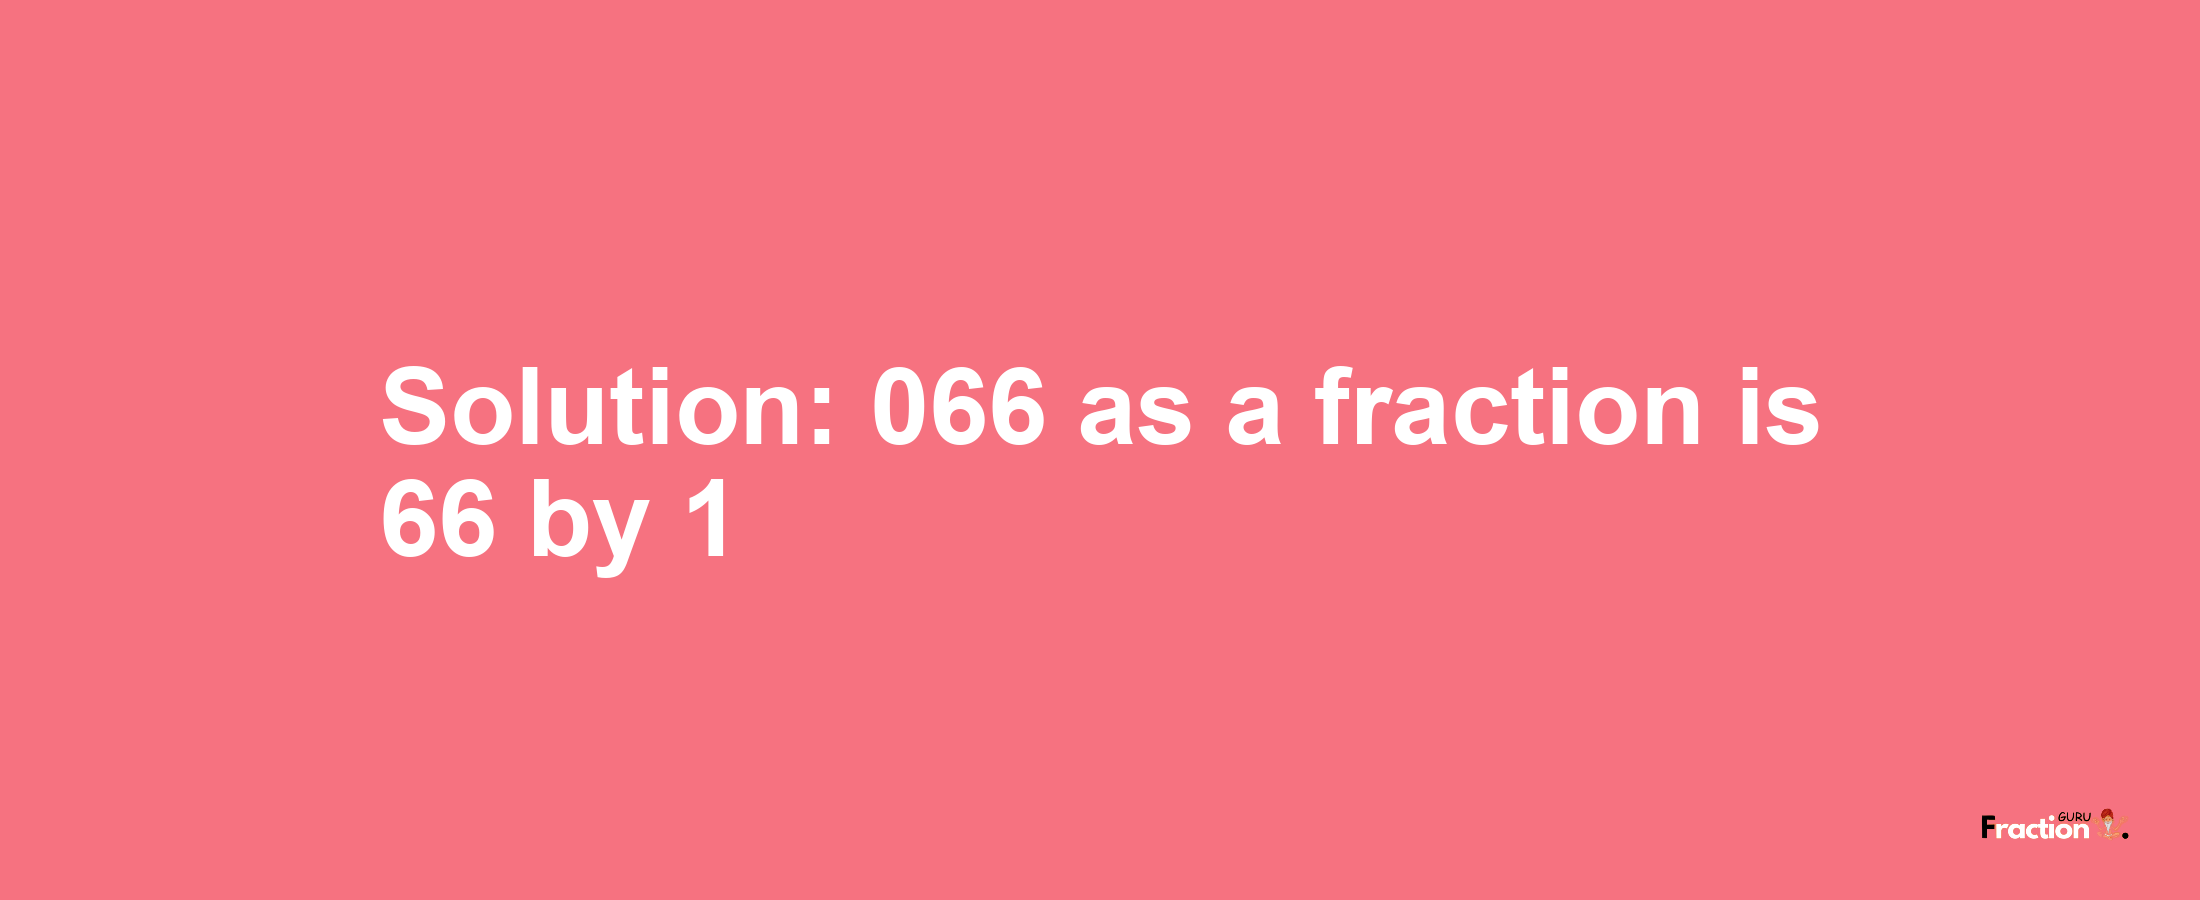 Solution:066 as a fraction is 66/1